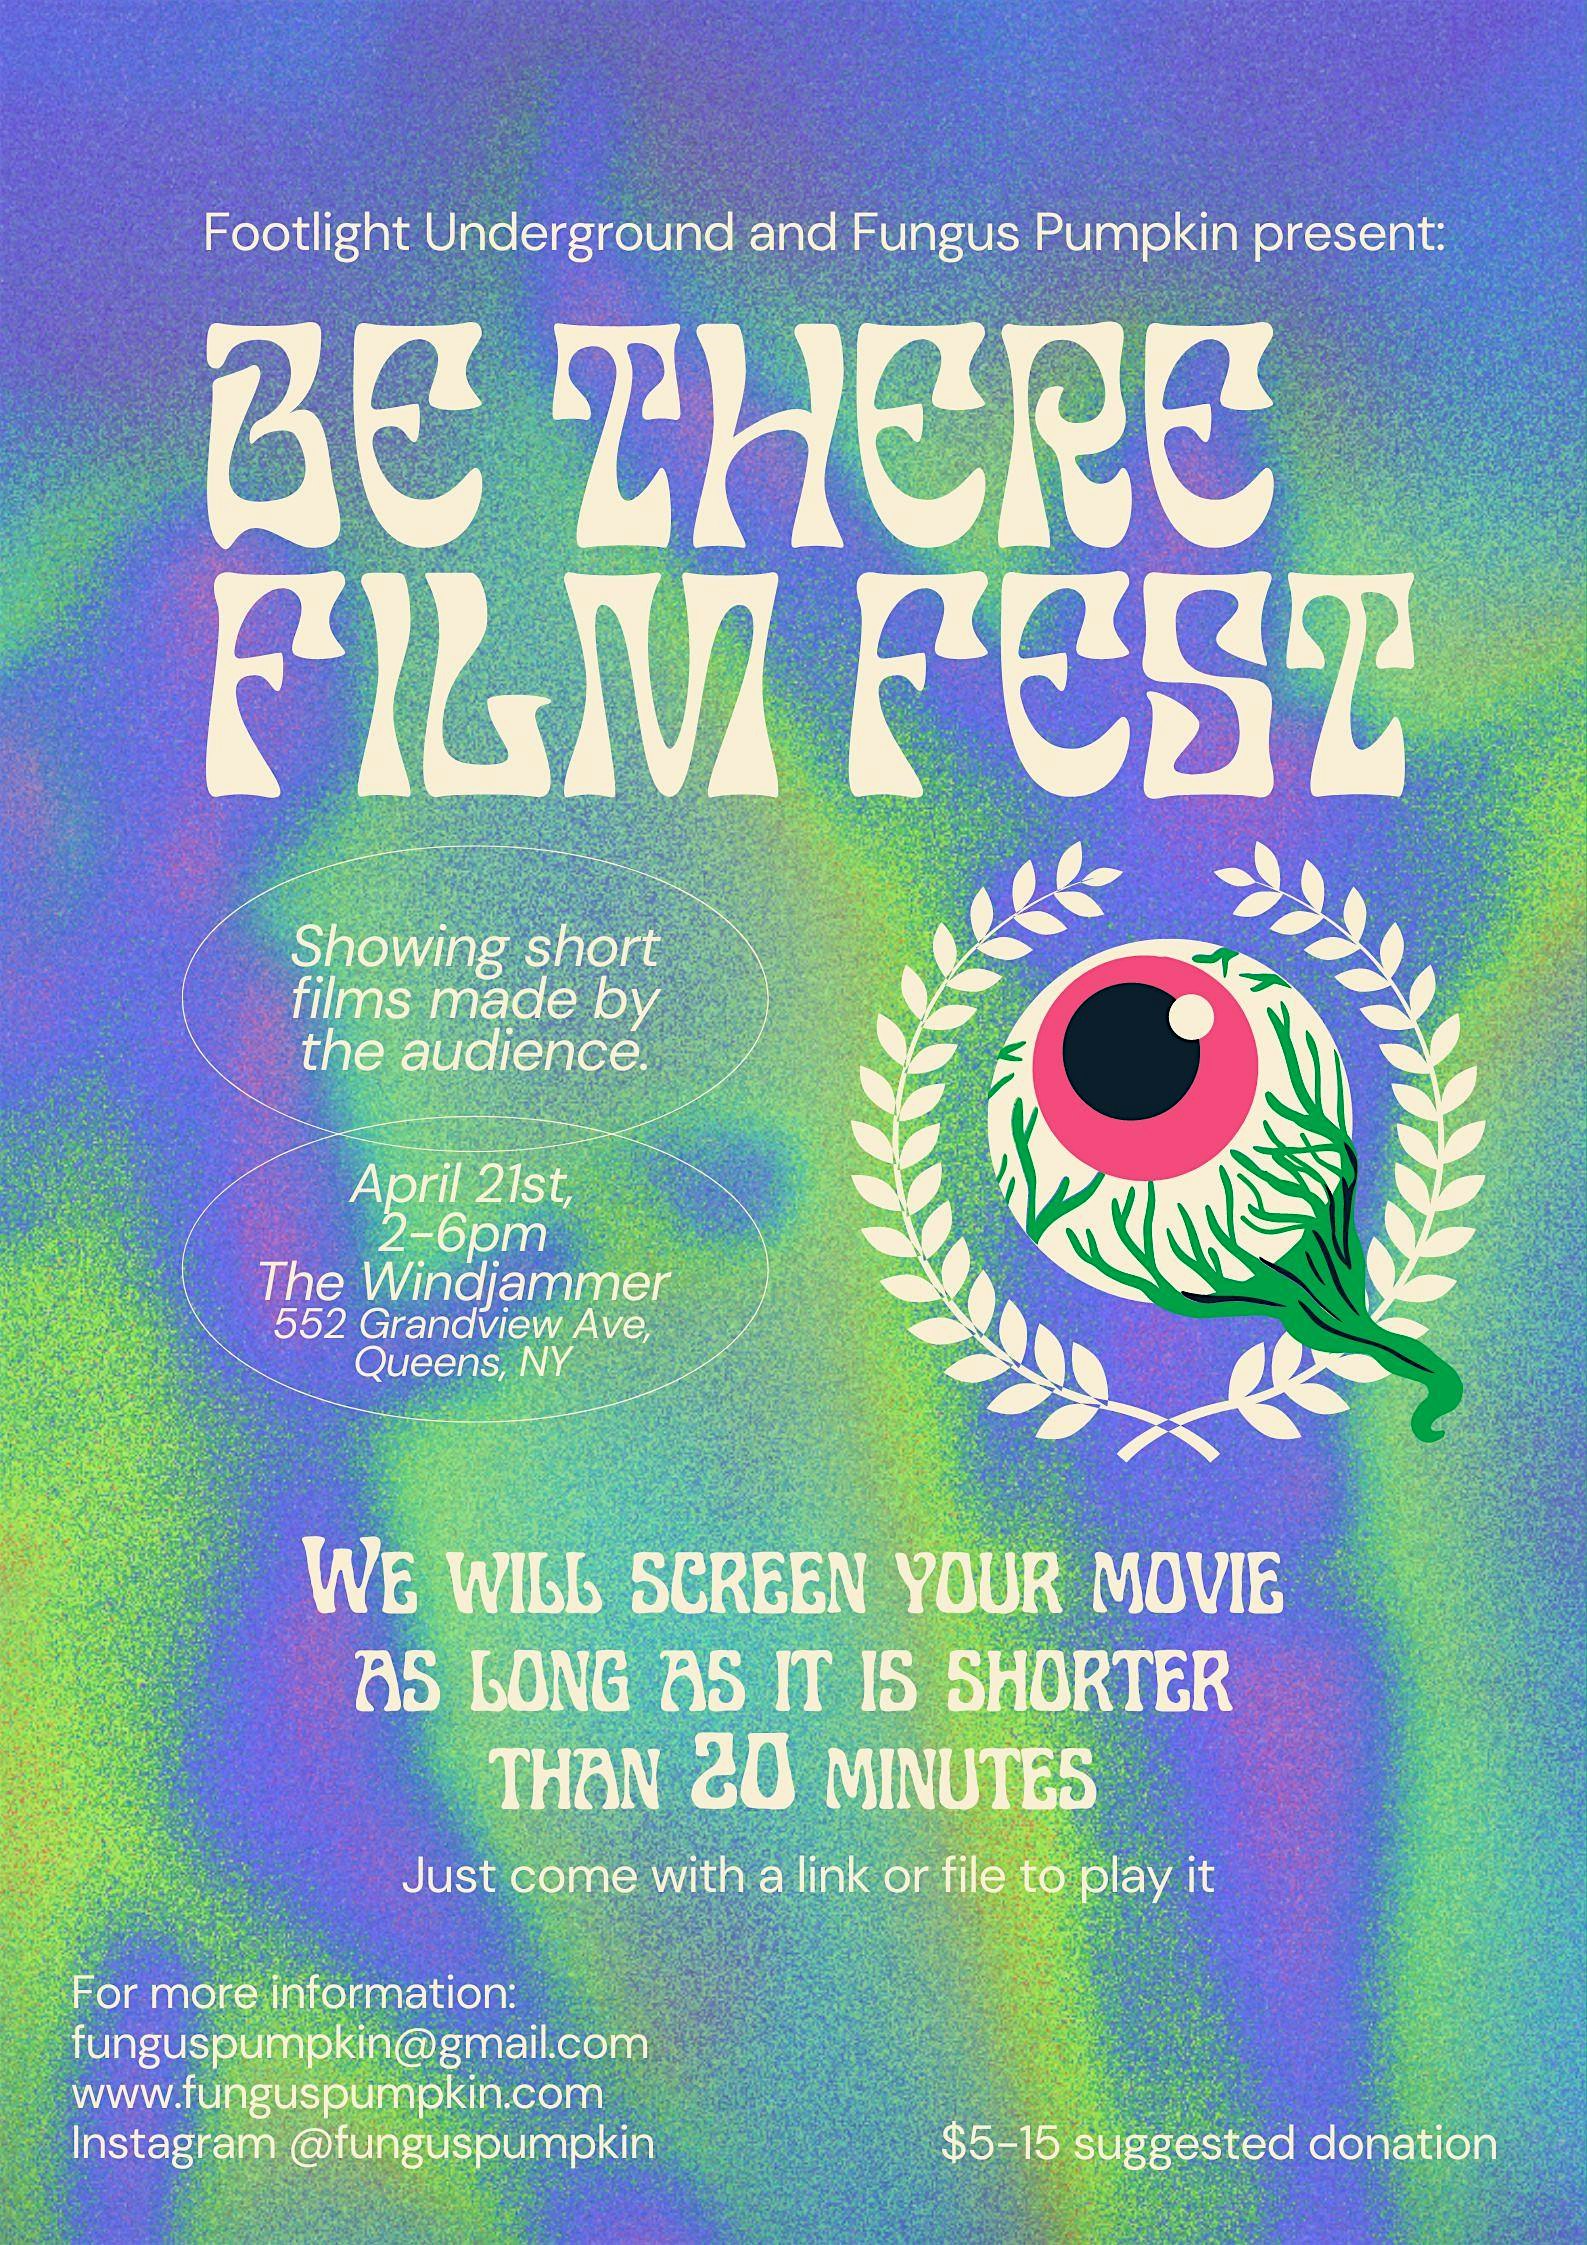 Be There Film Fest